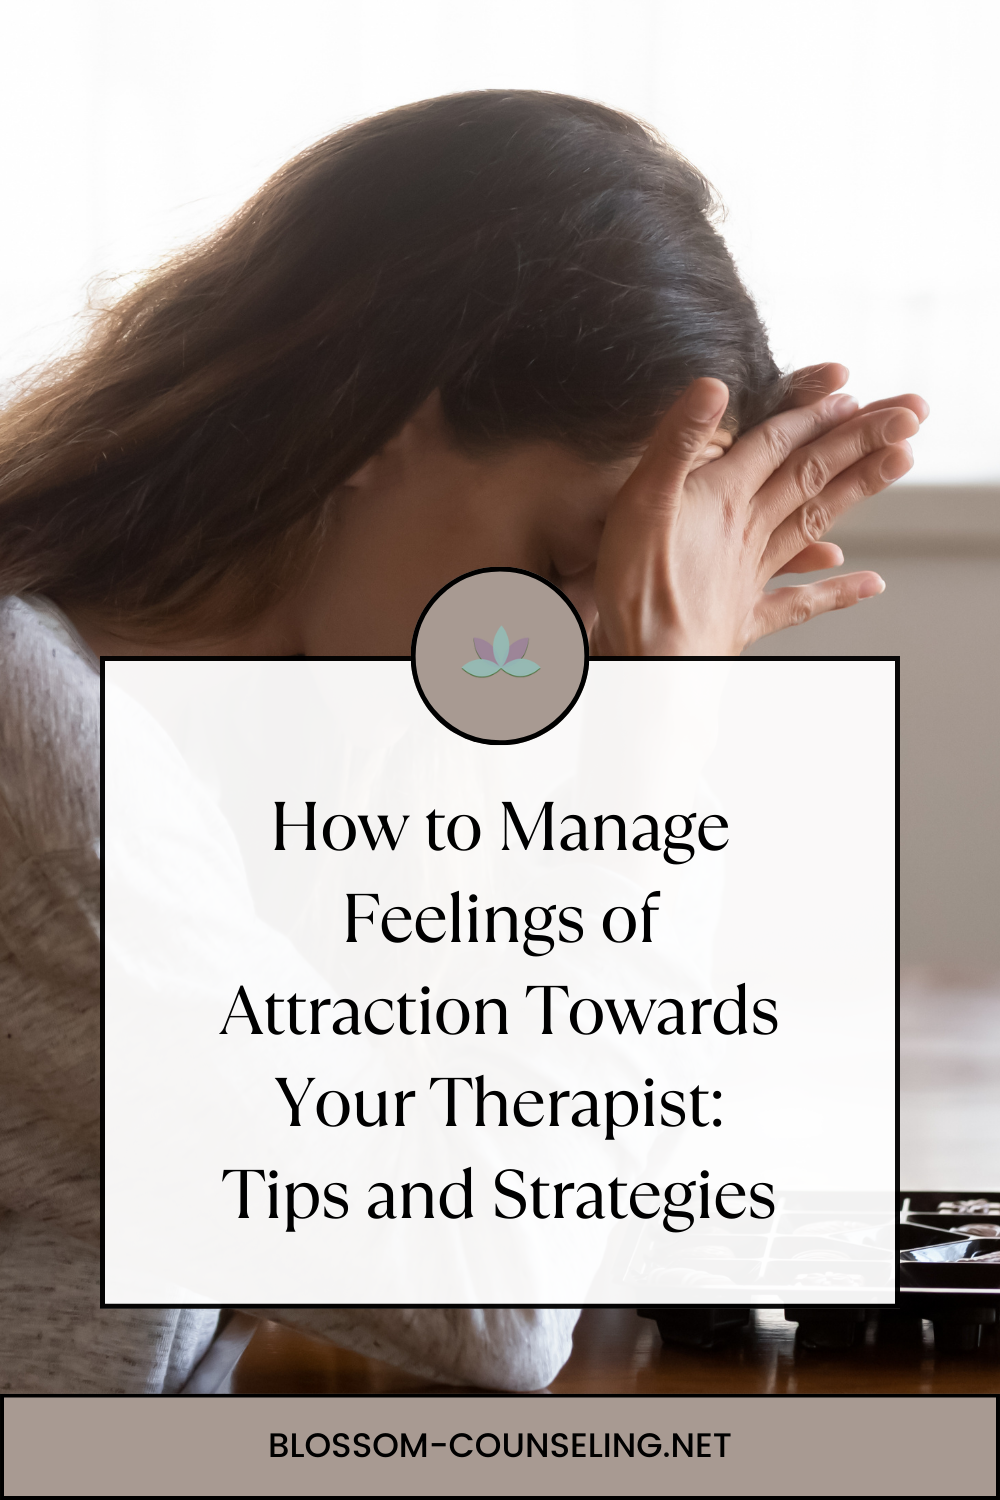 How to Manage Feelings of Attraction Towards Your Therapist: Tips and Strategies